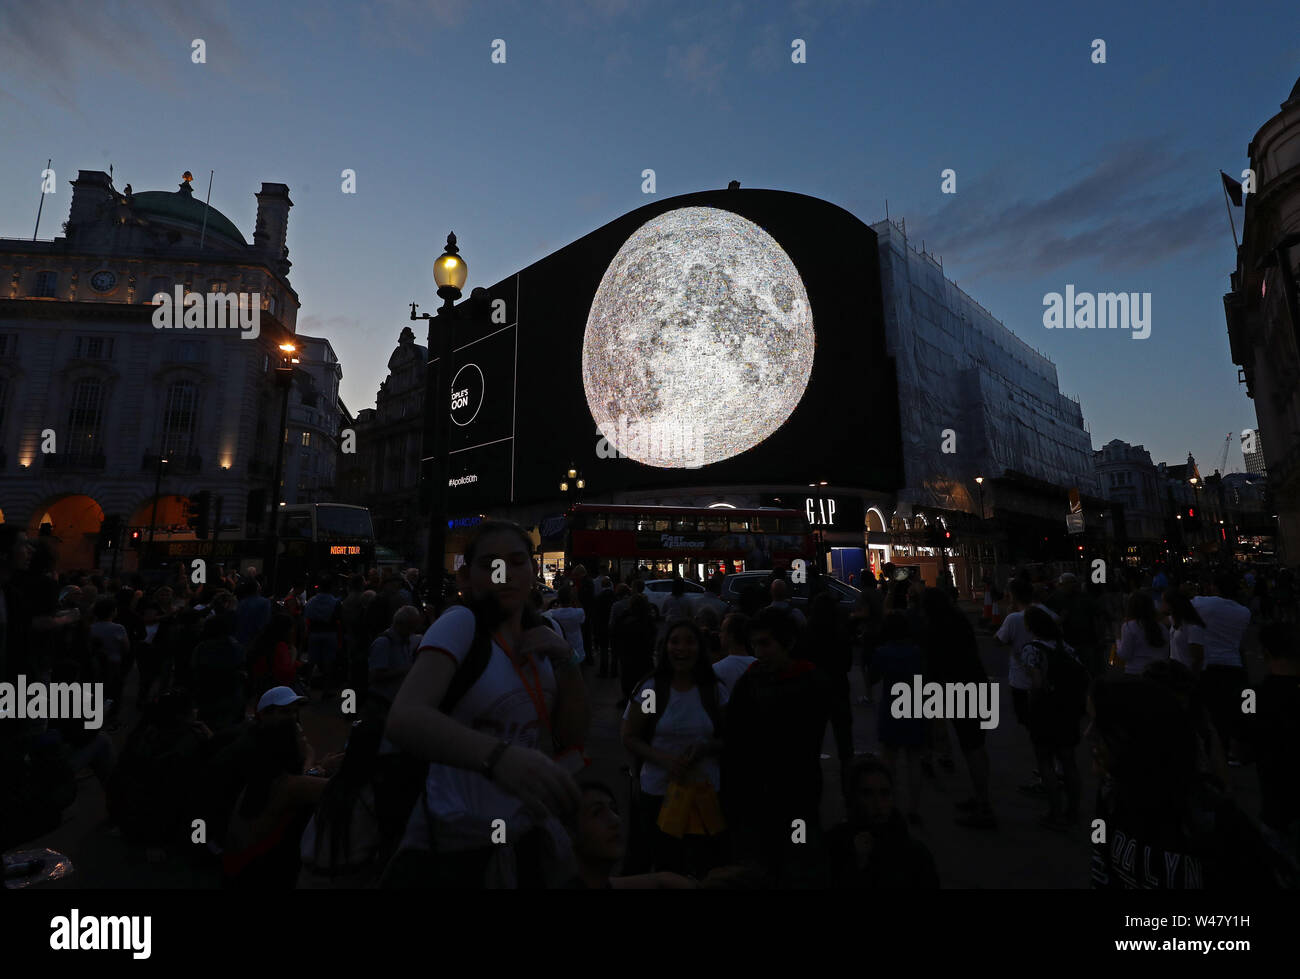 London artist Helen Marshall's People's Moon project, a giant photographic mosaic shown at the exact hour 50 years ago that Apollo 11 landed the first people on the Moon, at Piccadilly Circus, London. Stock Photo